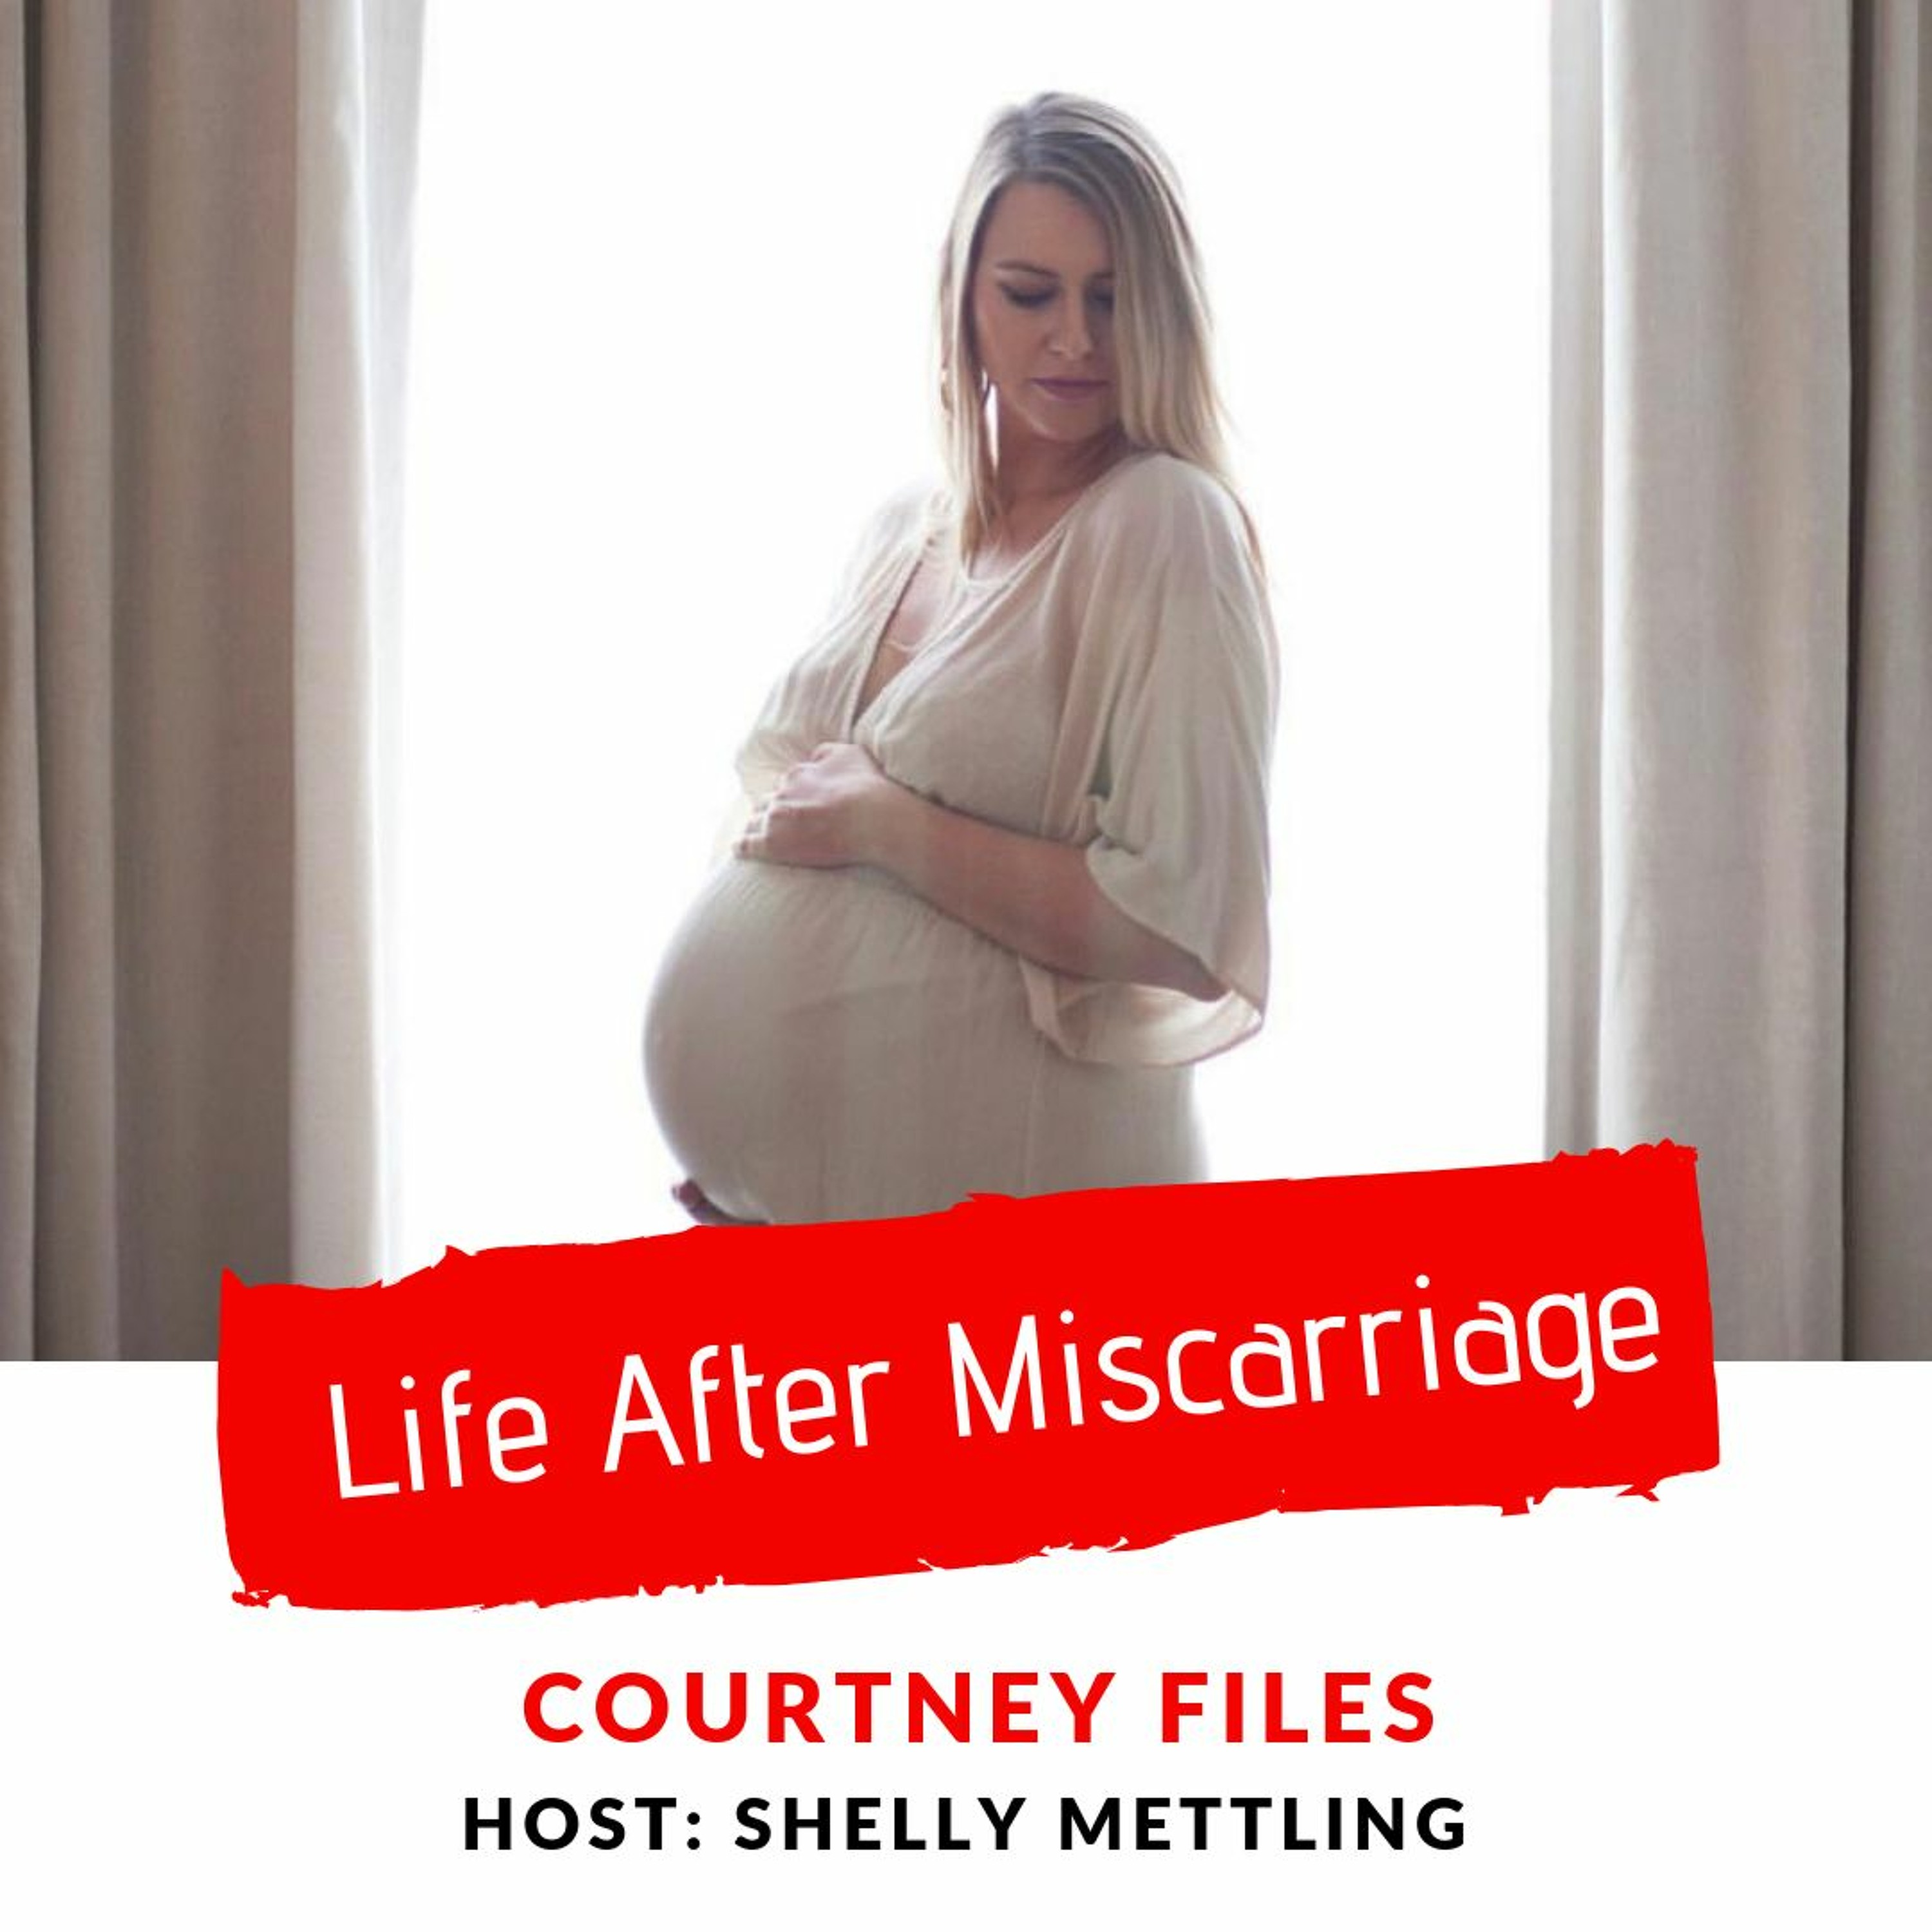 COURTNEY FILES - Pregnancy after Miscarriage